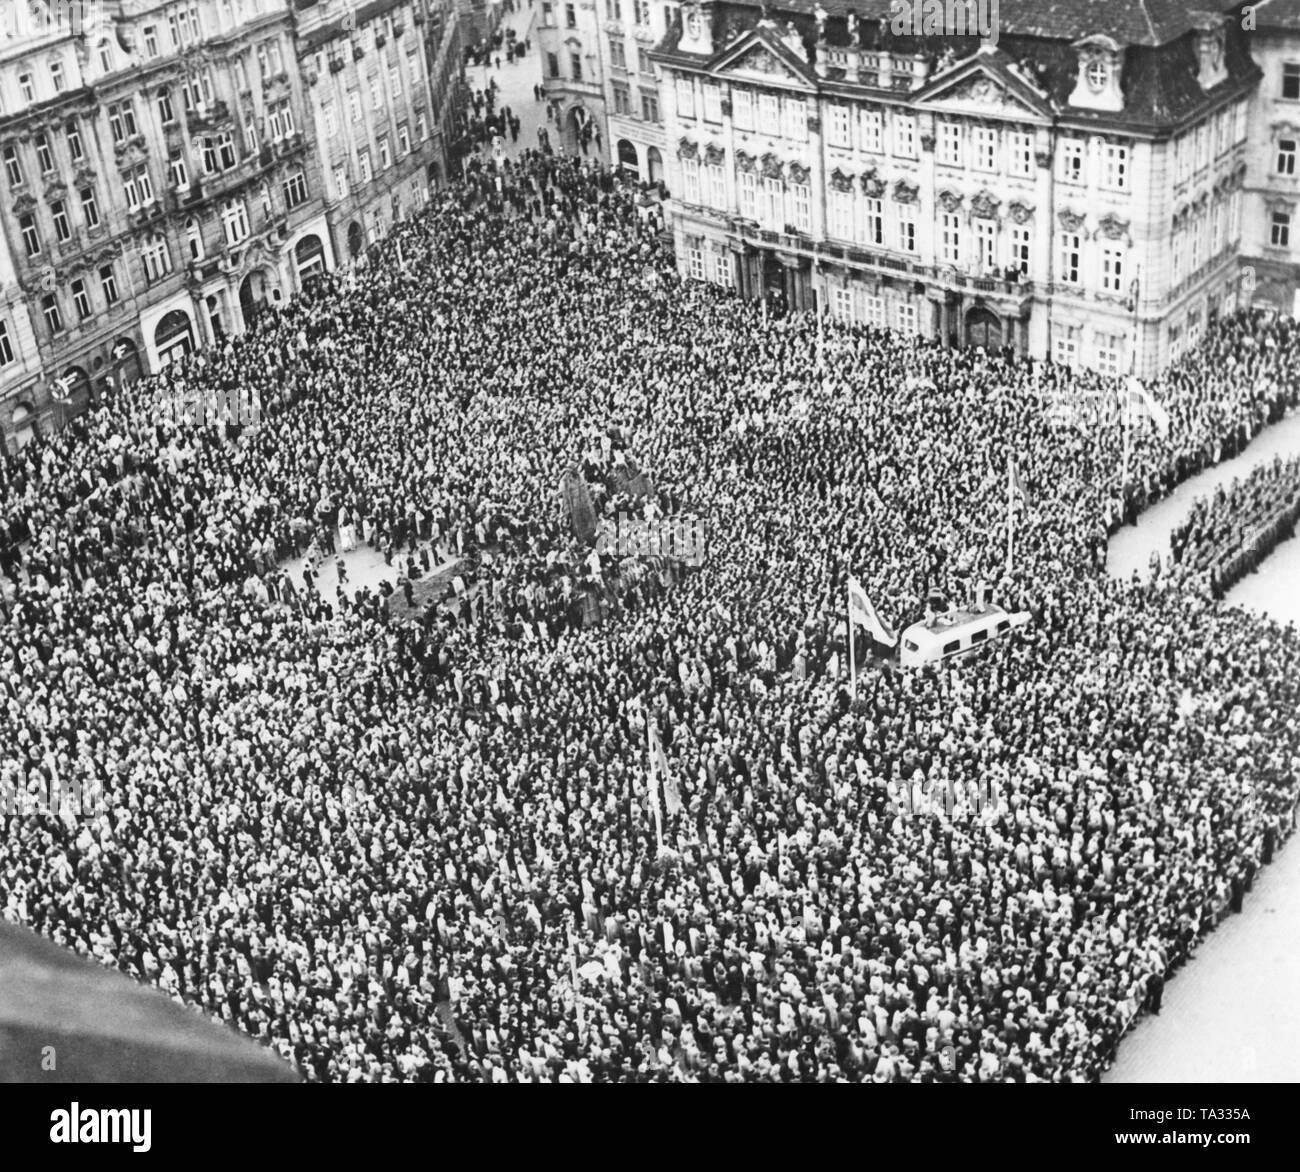 Rally at the Old Town Square in Prague on the occasion of Deputy Reich Protector Reinhard Heydrich's assasination. Prime Minister Jaroslav Krejci and Education Minister Emanuel Moravec give a speech at the rally. In May 1942 Czech resistance fighters committed an assassination attempt on the then-Deputy Reich Protector Reinhard Heydrich. Stock Photo